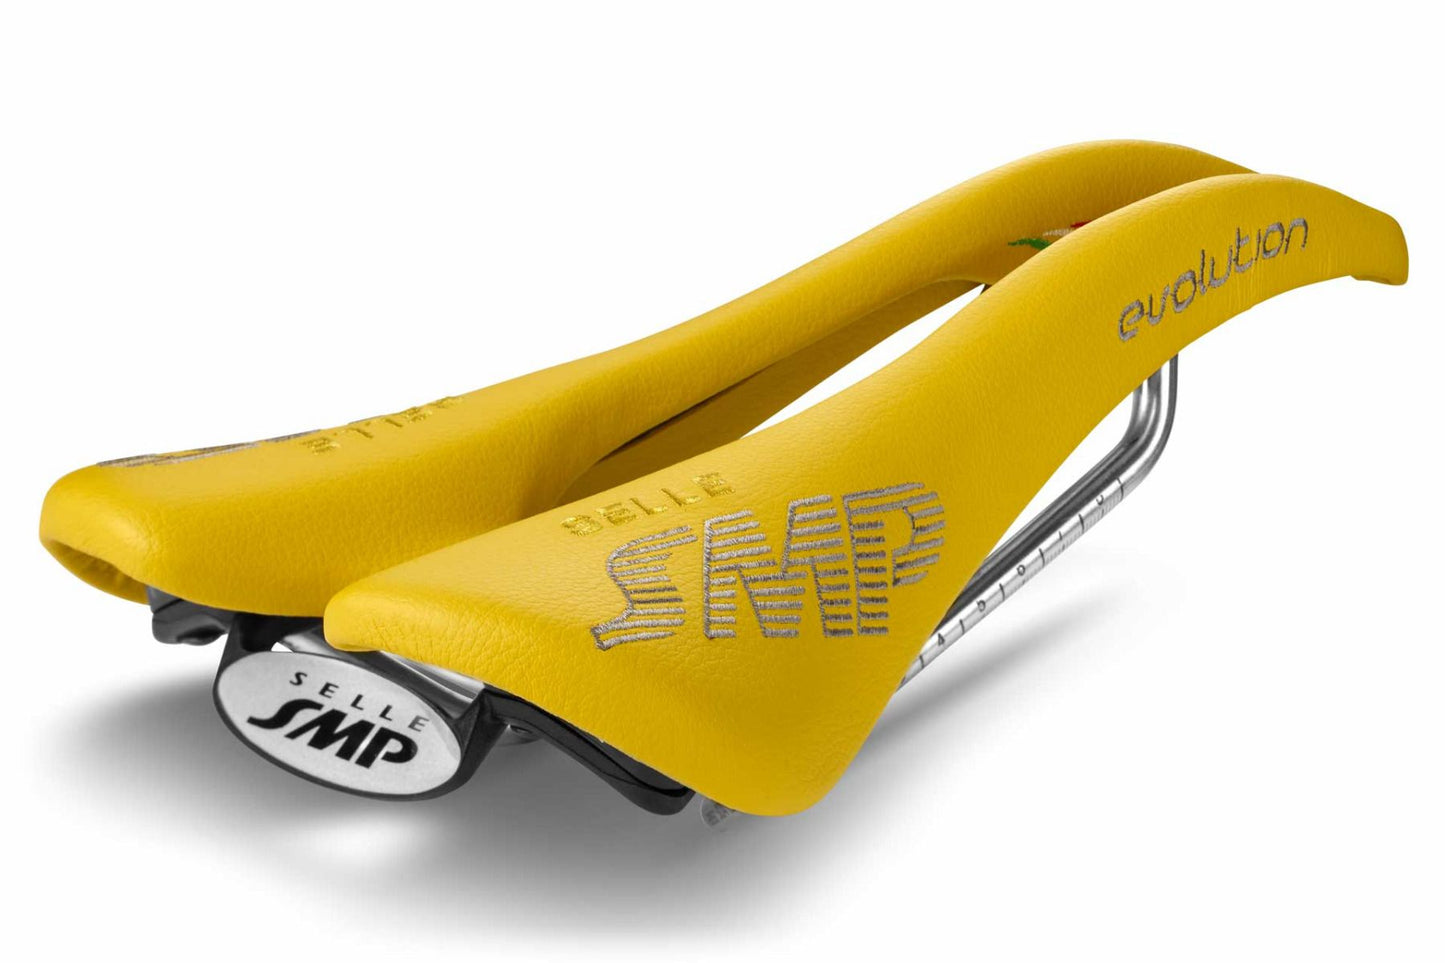 Selle SMP Evolution Saddle with Steel Rails (Yellow)